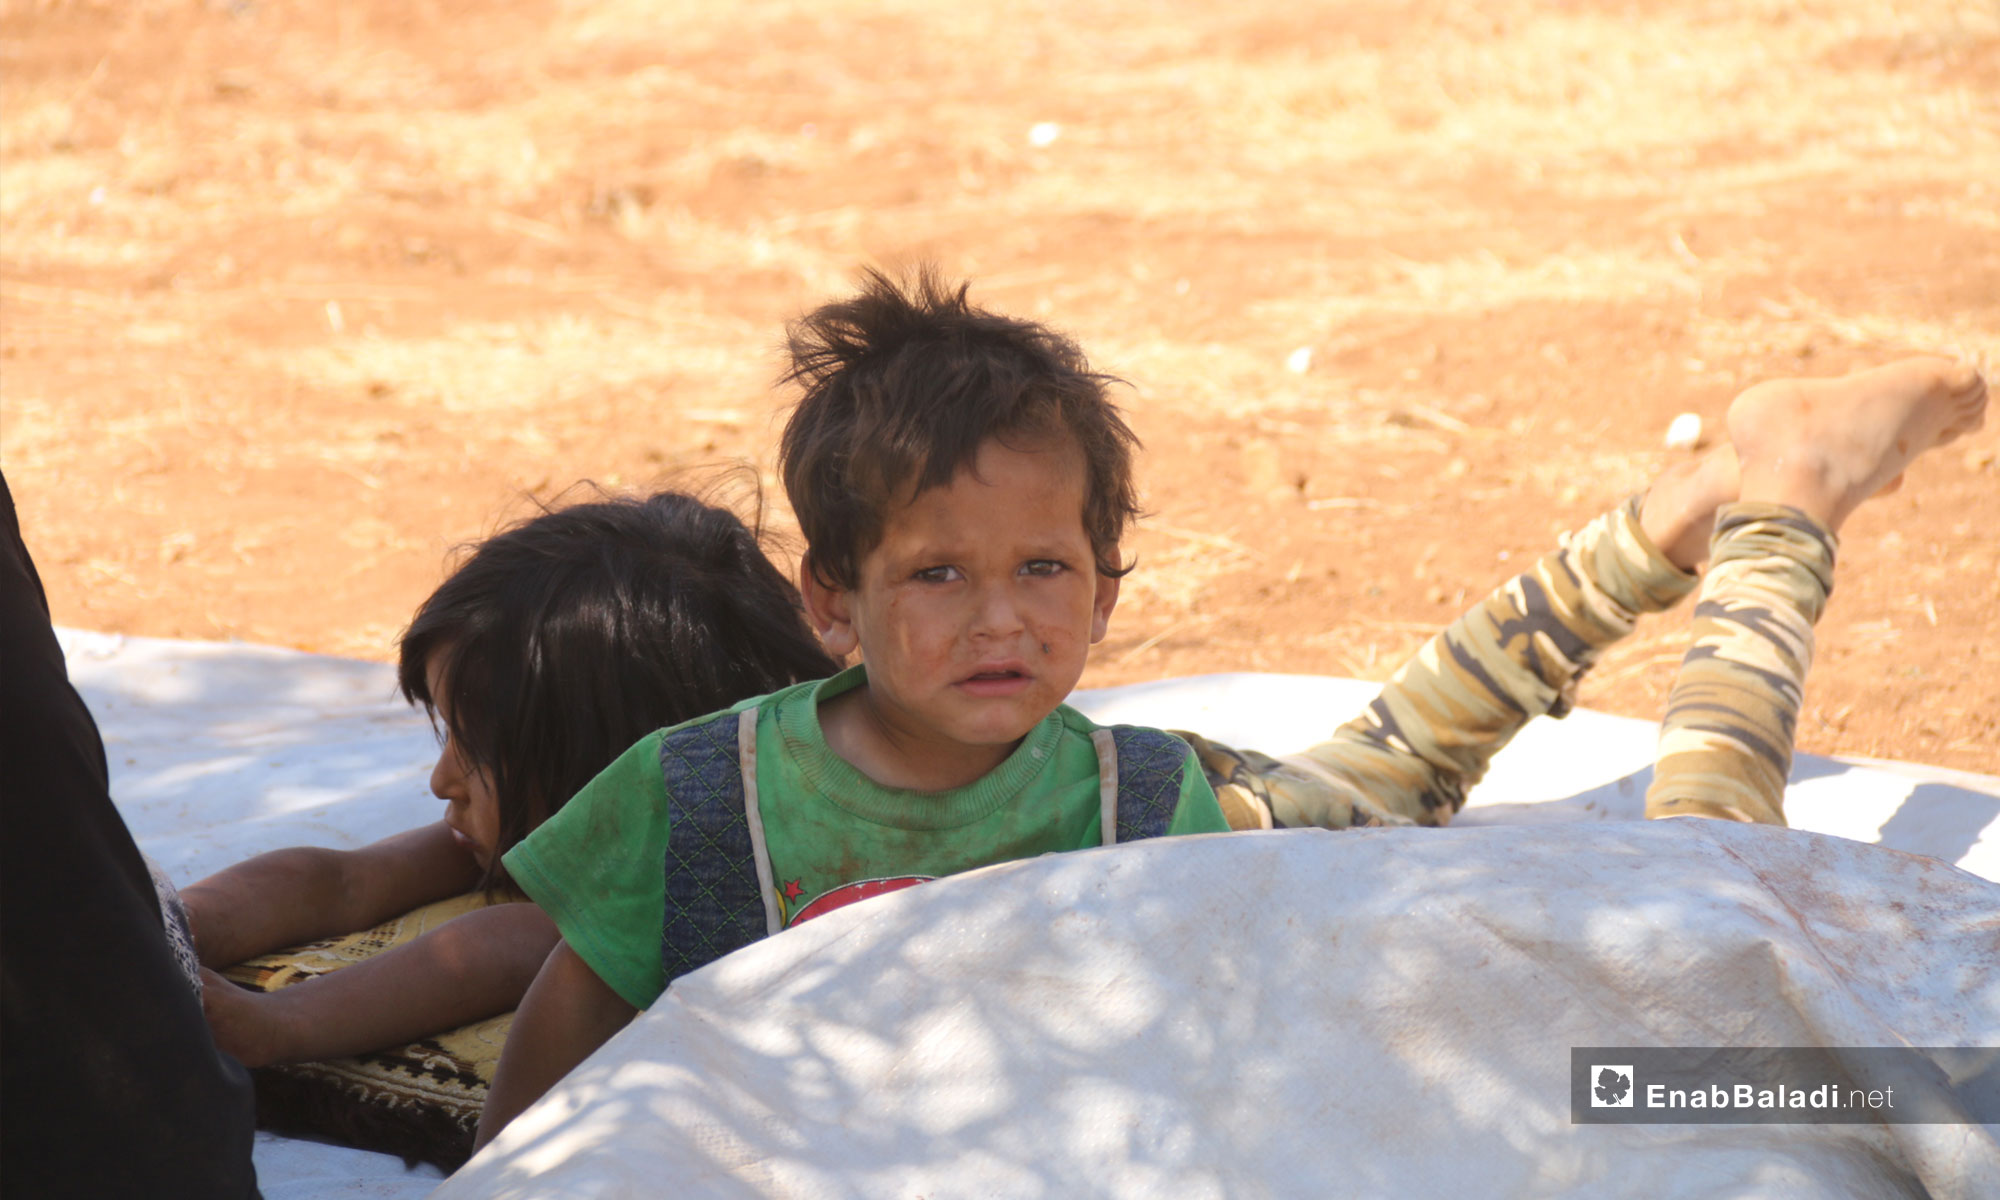 Child displaced from rural Idlib due to shelling to the town of Sarman near the Turkish supervision point in Idlib – September 12, 2018 (Enab Baladi)